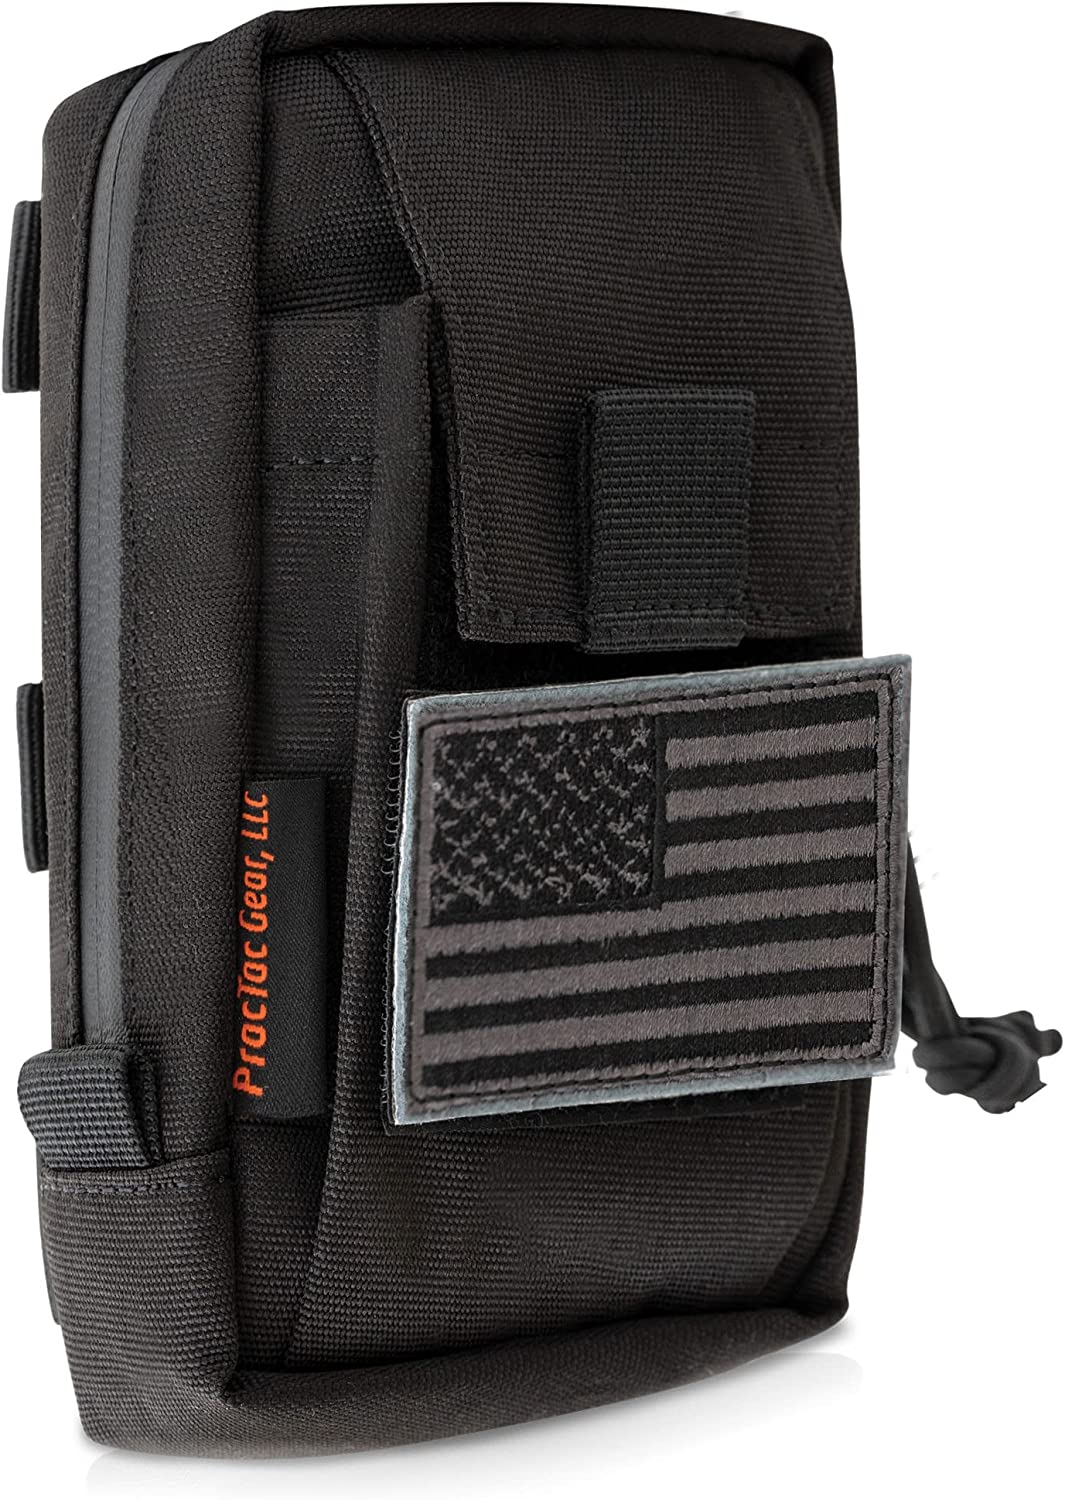 US Customer Service PracTac Gear for Men Nylon, Cell Phone Case Pouch Tactical, EDC Pouch Backpack Shoulder Strap Clip On Molle Attachment for Cell Phone